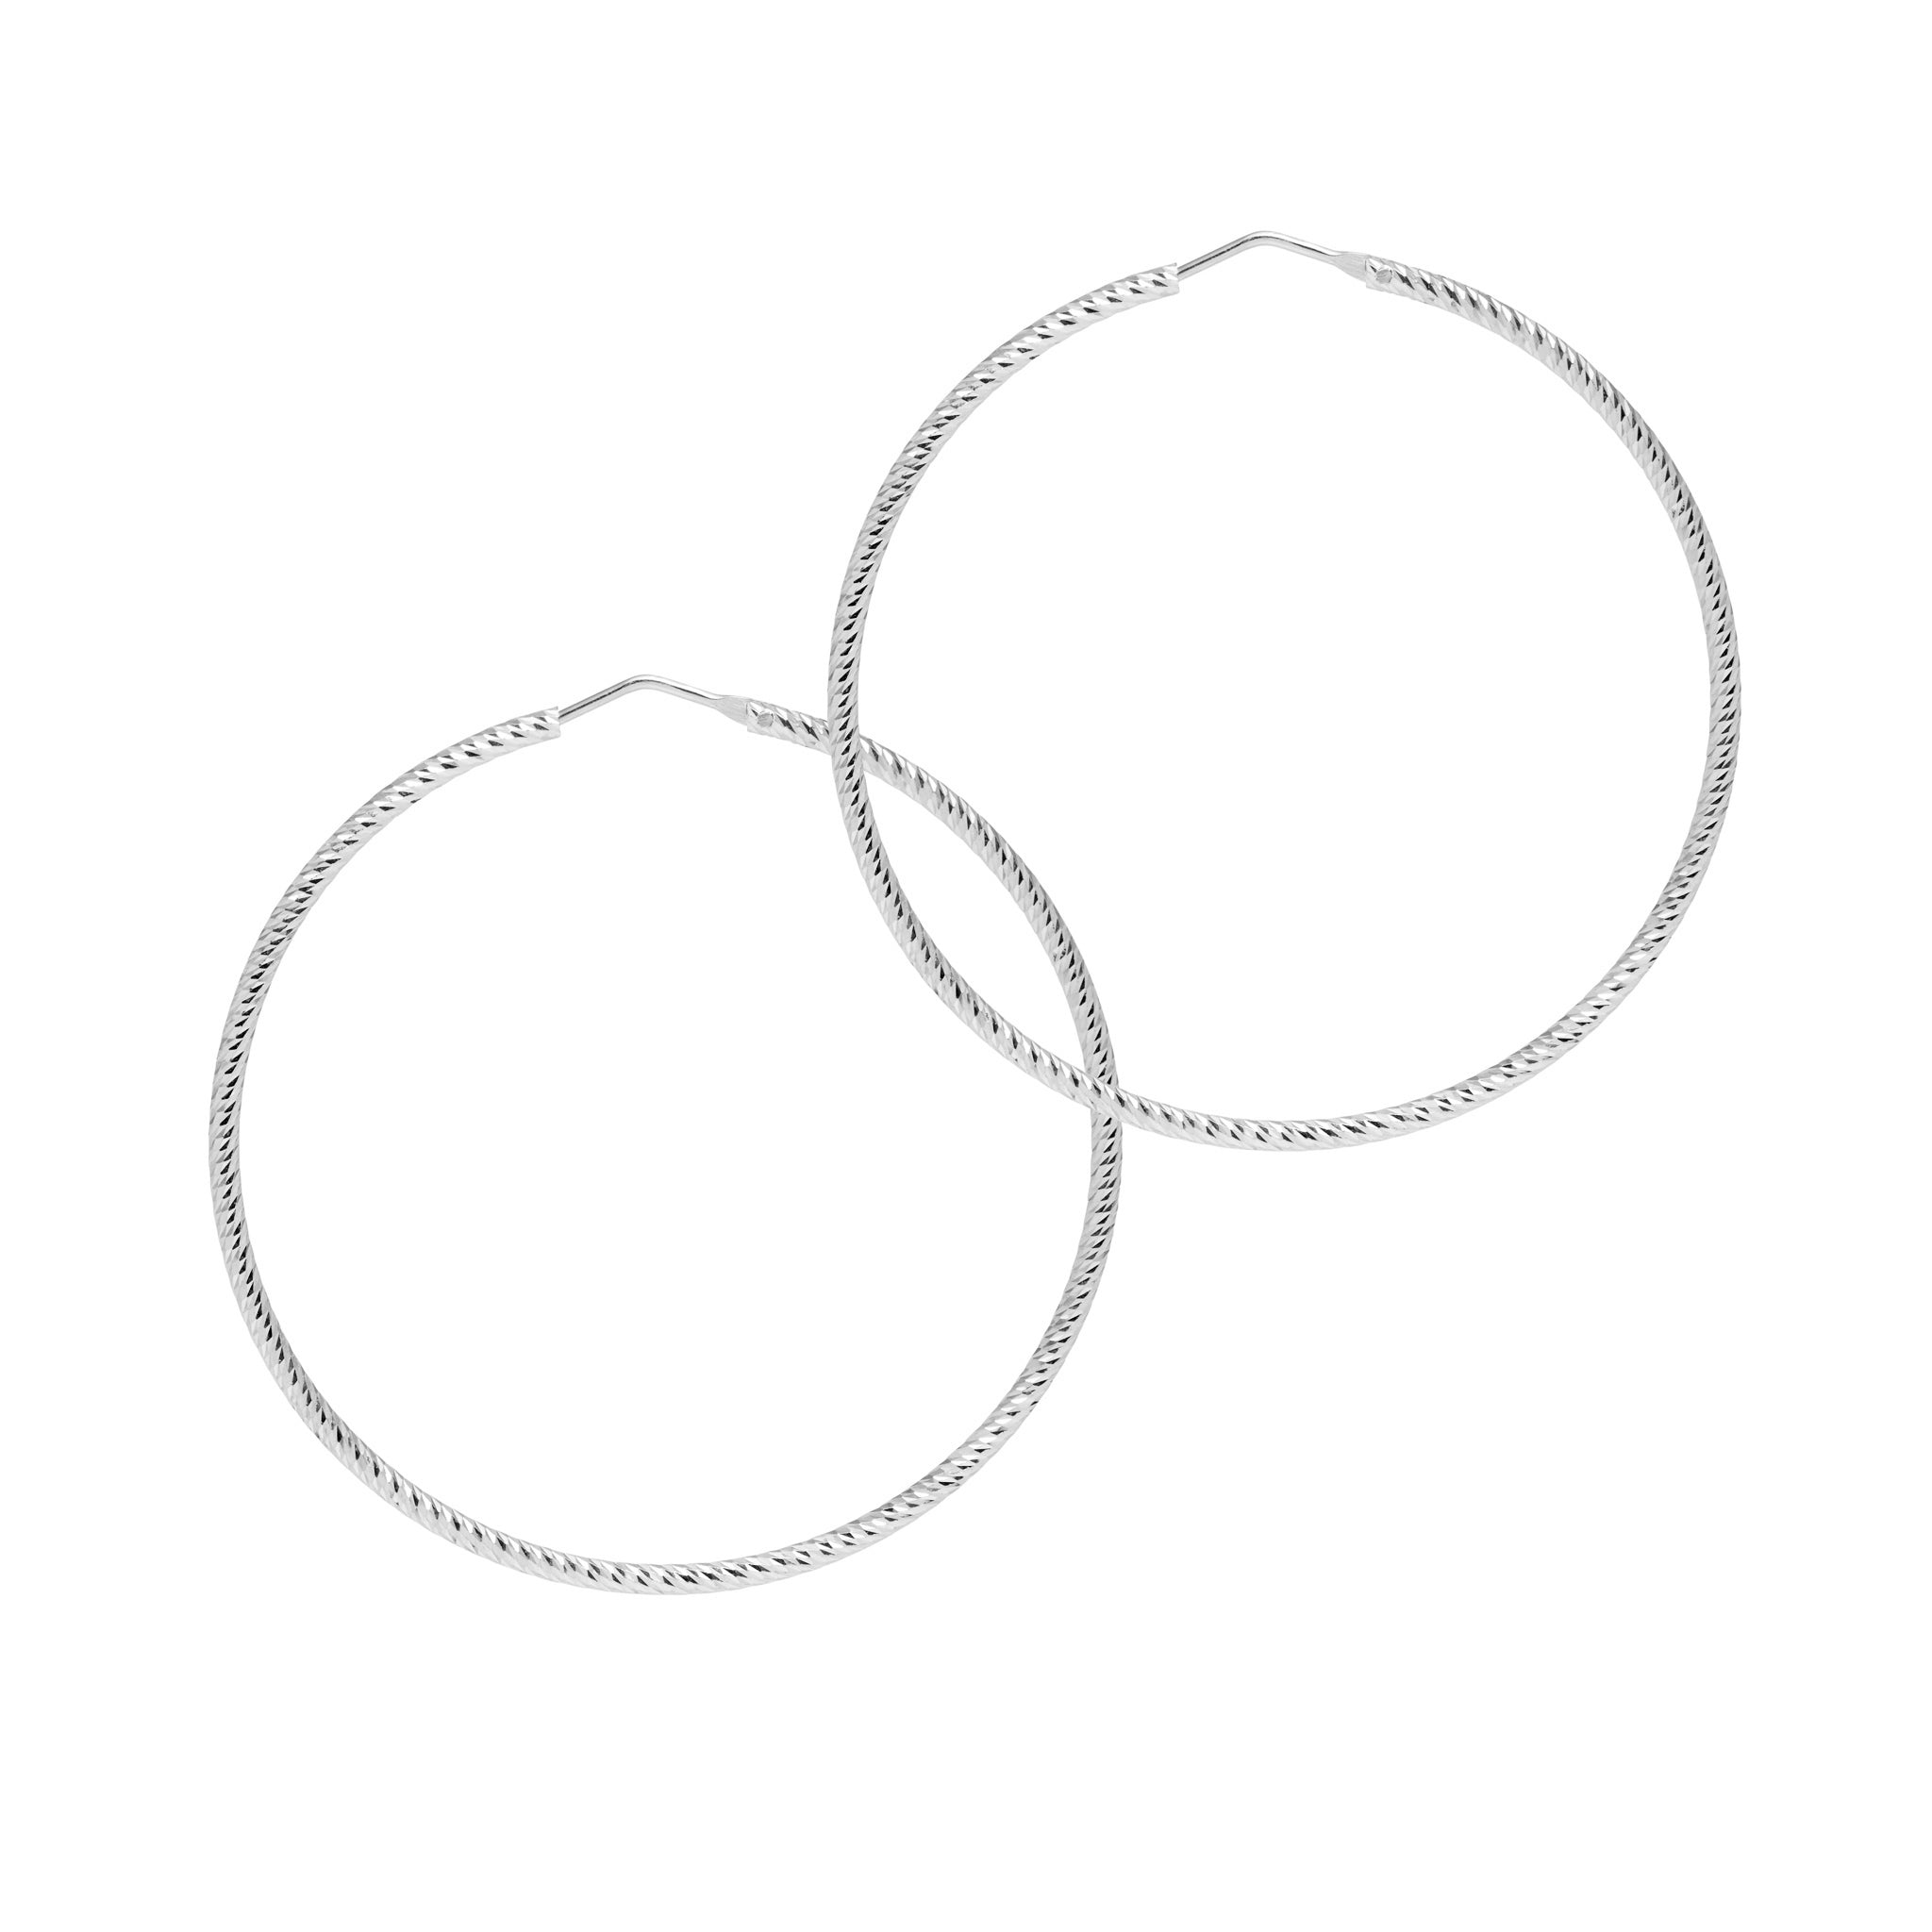 Roma Hoops & Bangle Gift-Set - Silver - The Hoop Station 